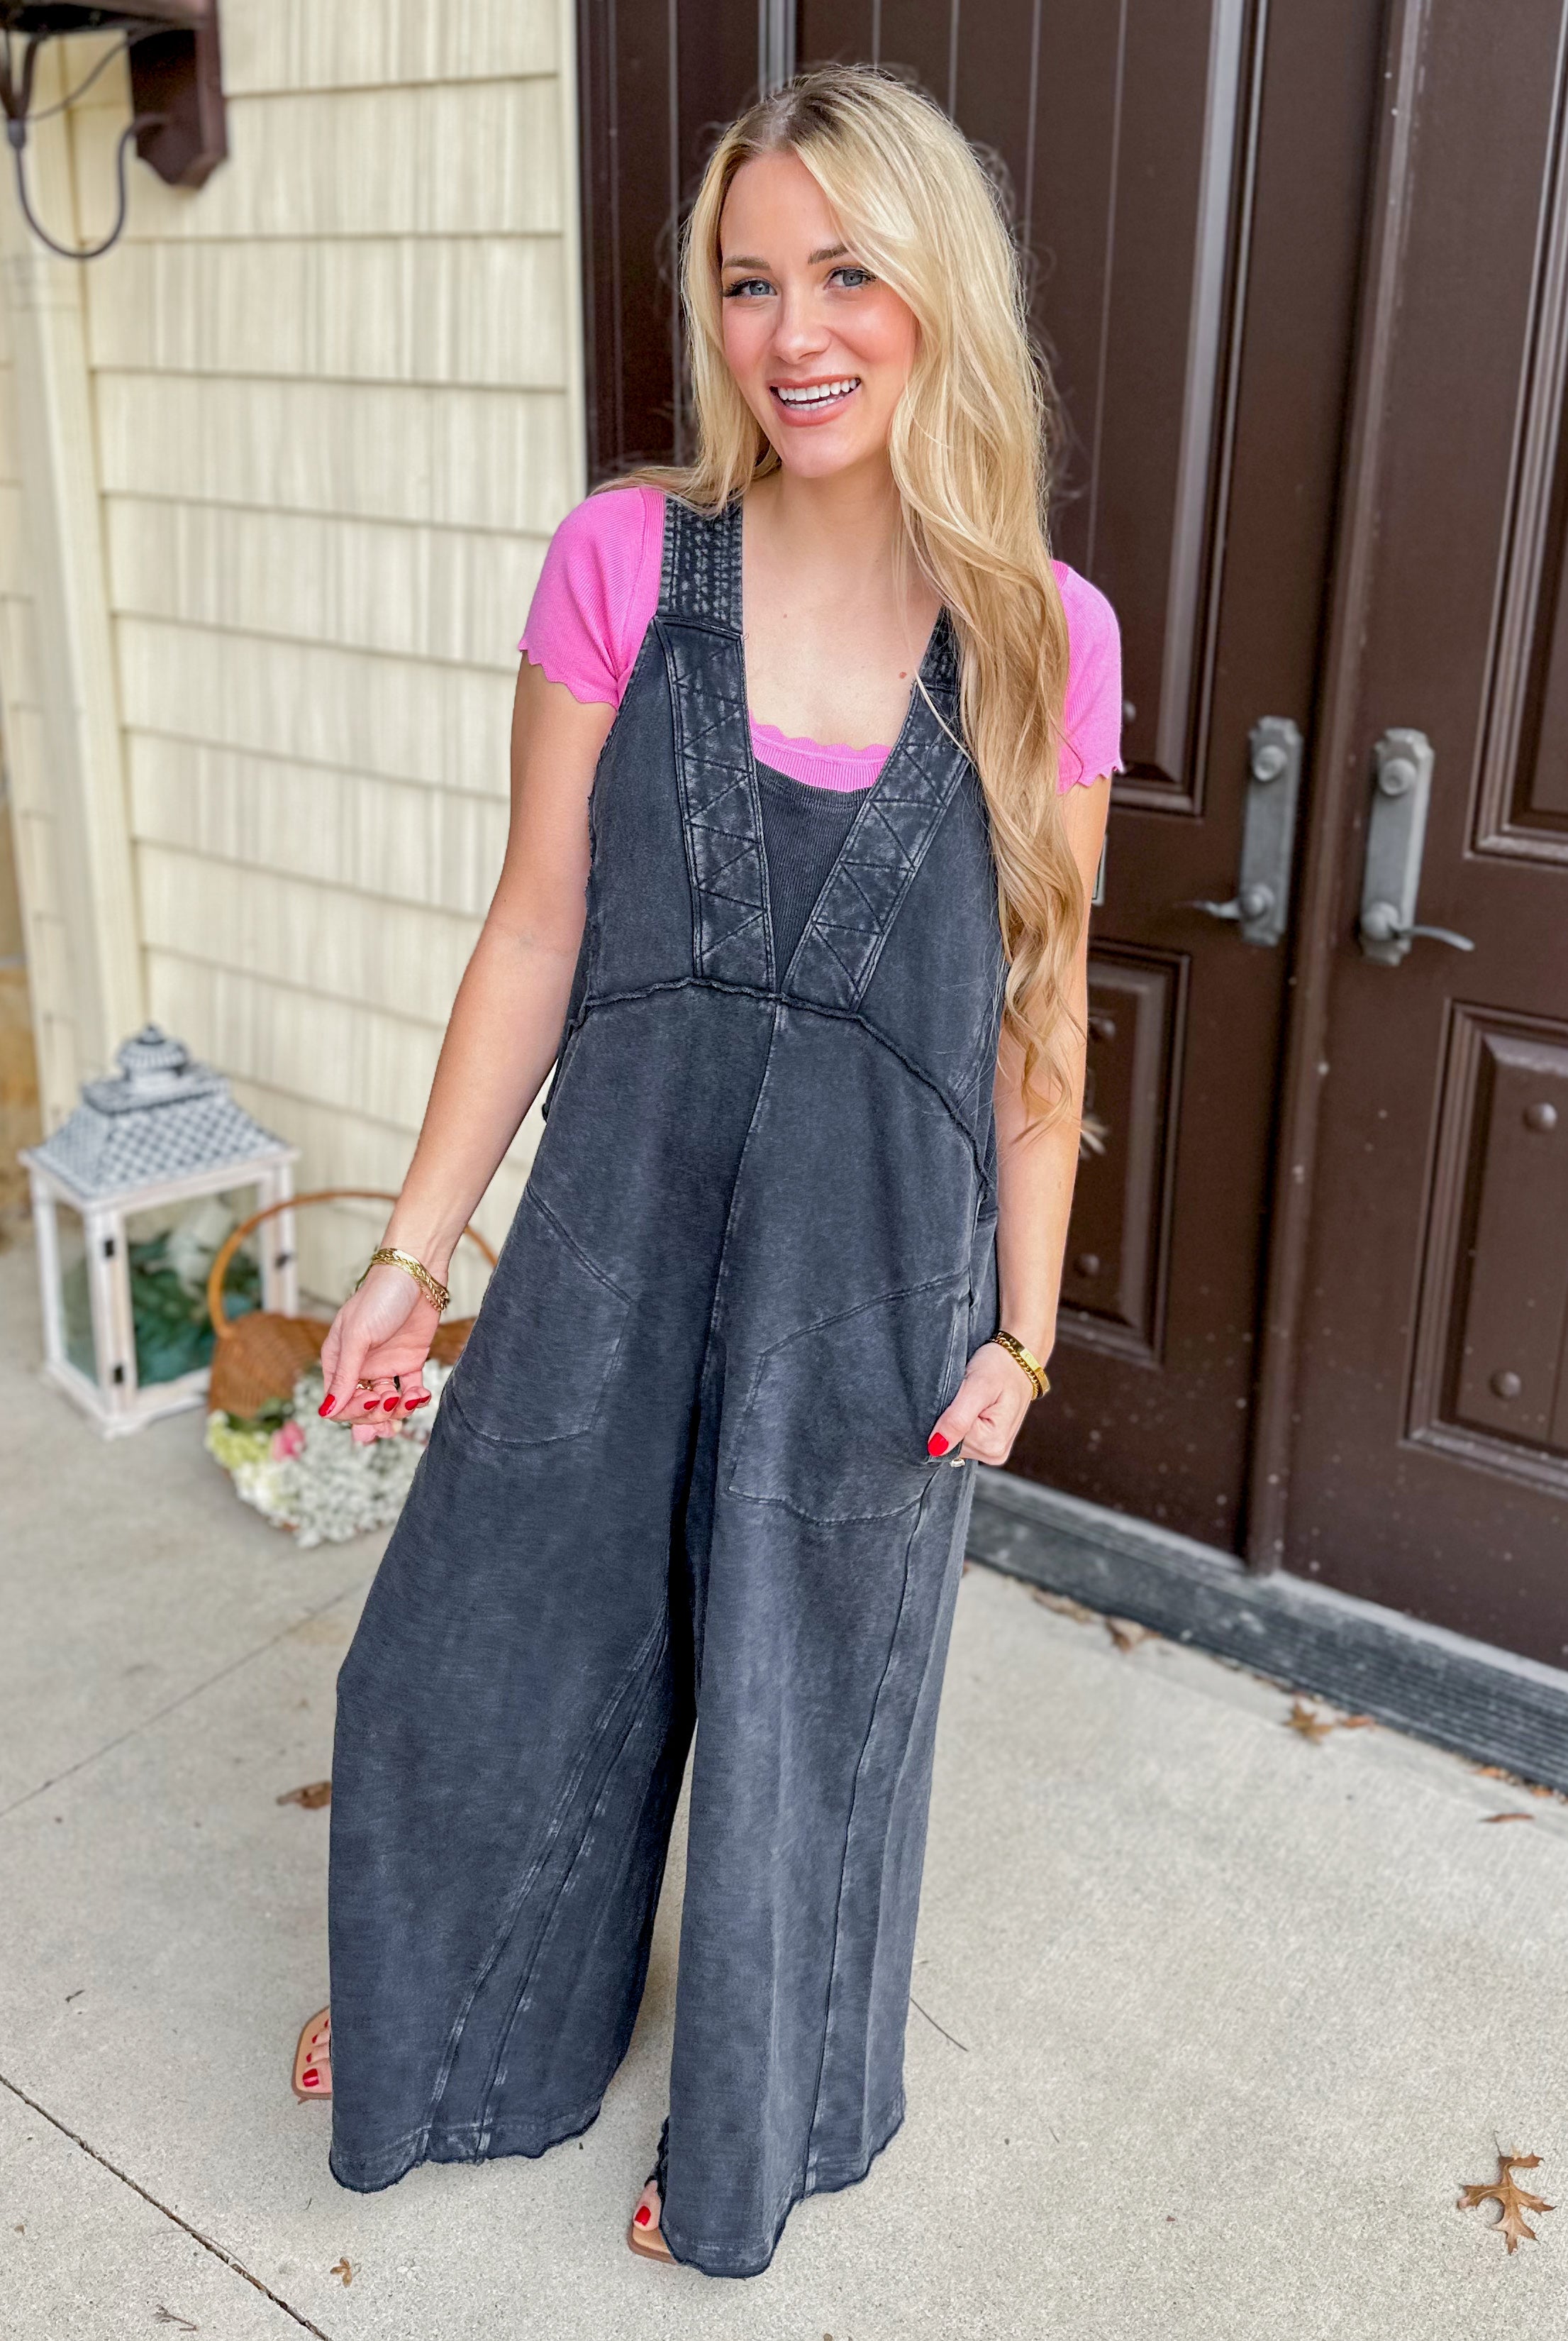 Max Soft Terry Knit Washed Jumpsuit - Be You Boutique